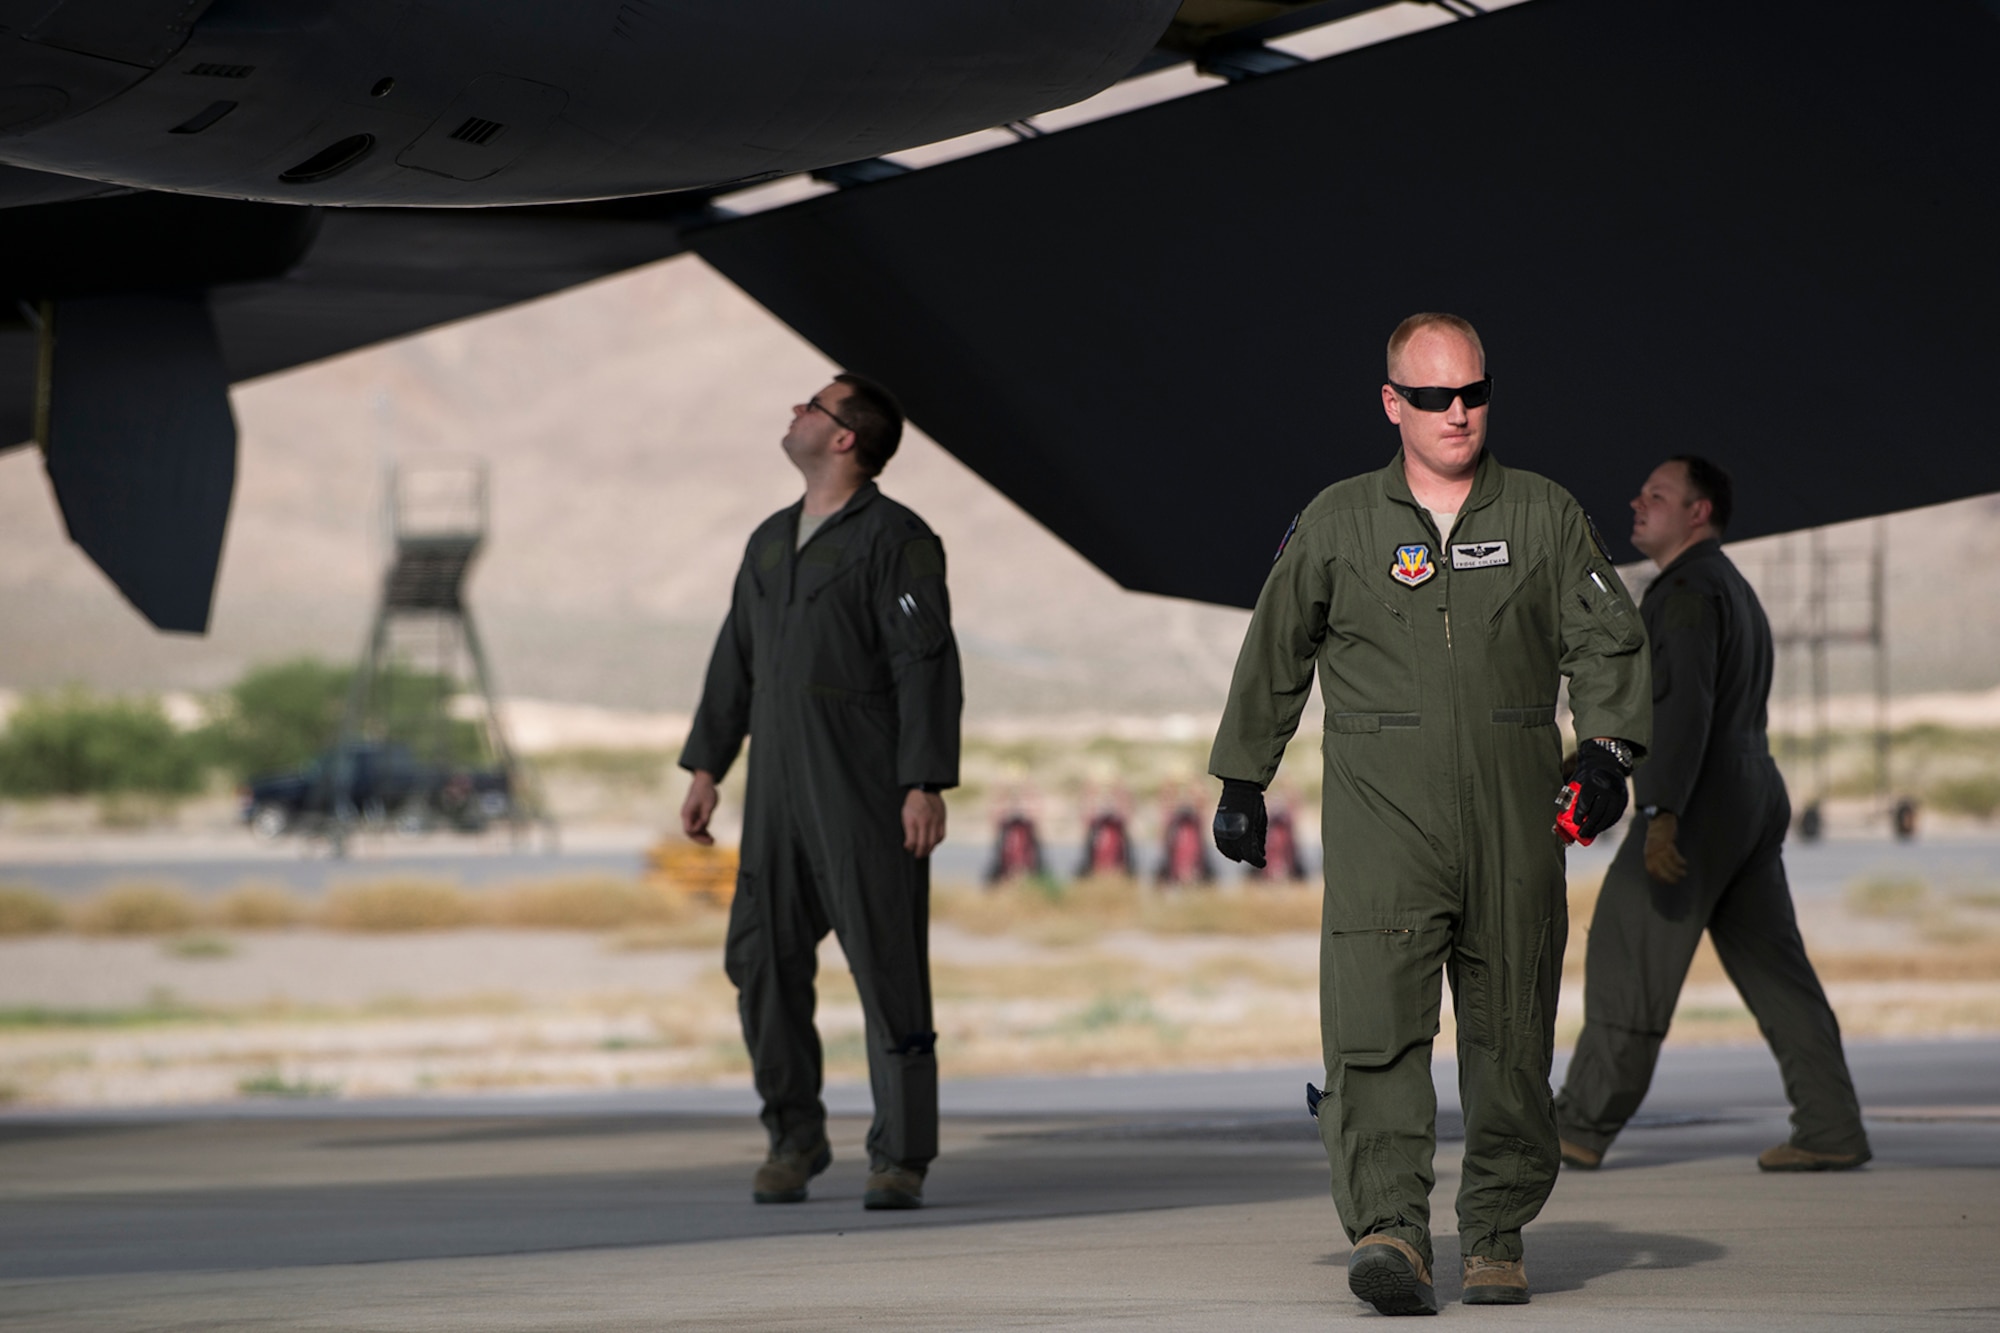 Aircrew members perform a preflight inspection on a B-52H Stratofortress prior to a mission on June 8, 2016, Nellis Air Force Base, Nev. Maintenance personnel and three B-52s assigned to the Air Force Reserve Command’s 307th Bomb Wing and Active Duty 2nd Bomb Wing are at Nellis supporting the 340th Weapons Squadron. (U.S. Air Force photo by Master Sgt. Greg Steele/Released)